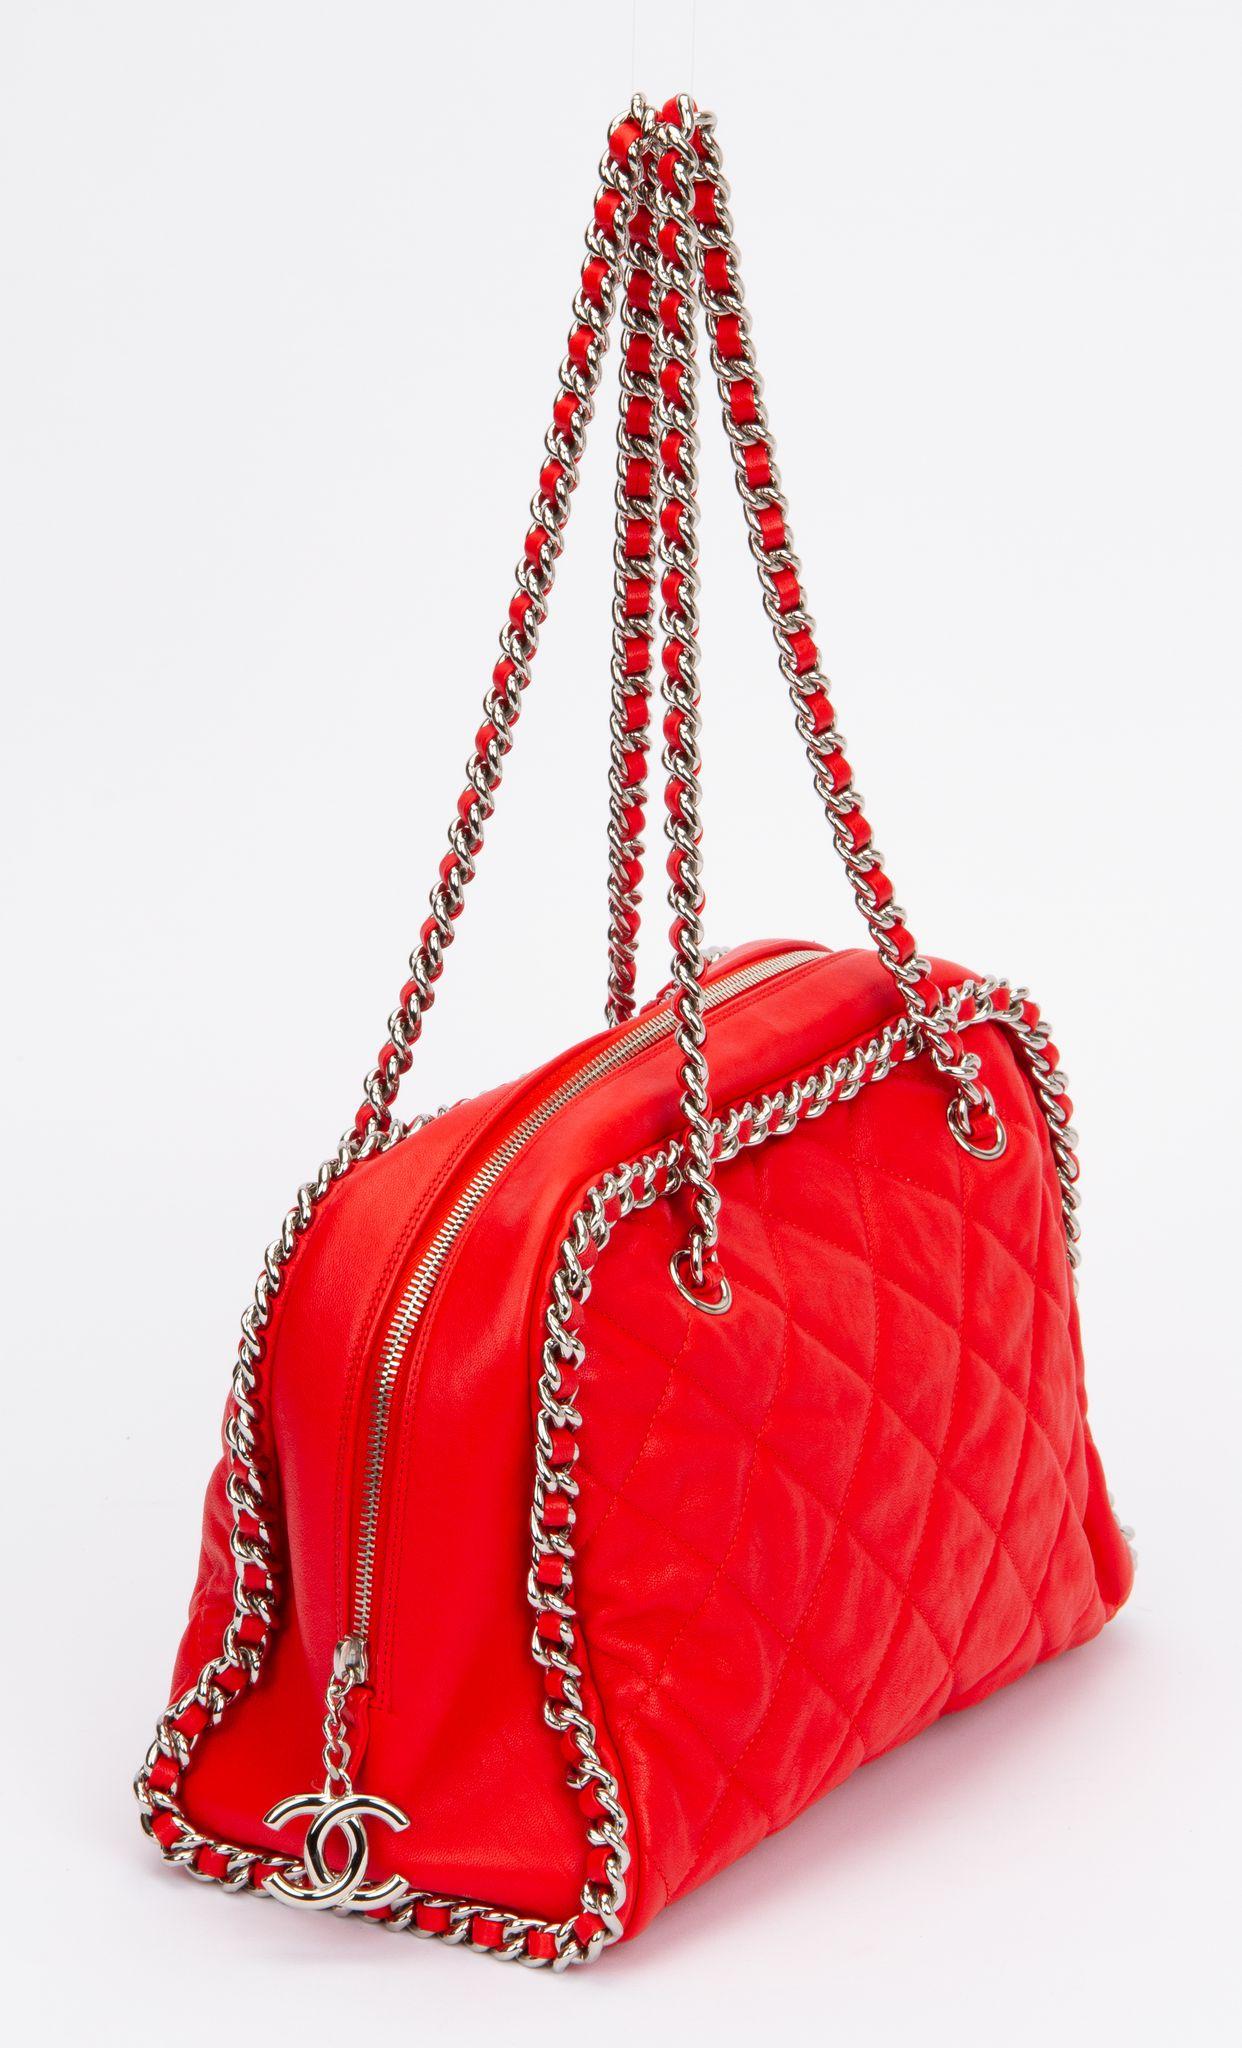 Chanel red Lambskin mint chain around shoulder zipped bag with silver tone hardware. Collection 15. Includes original key holder, card and dust cover.